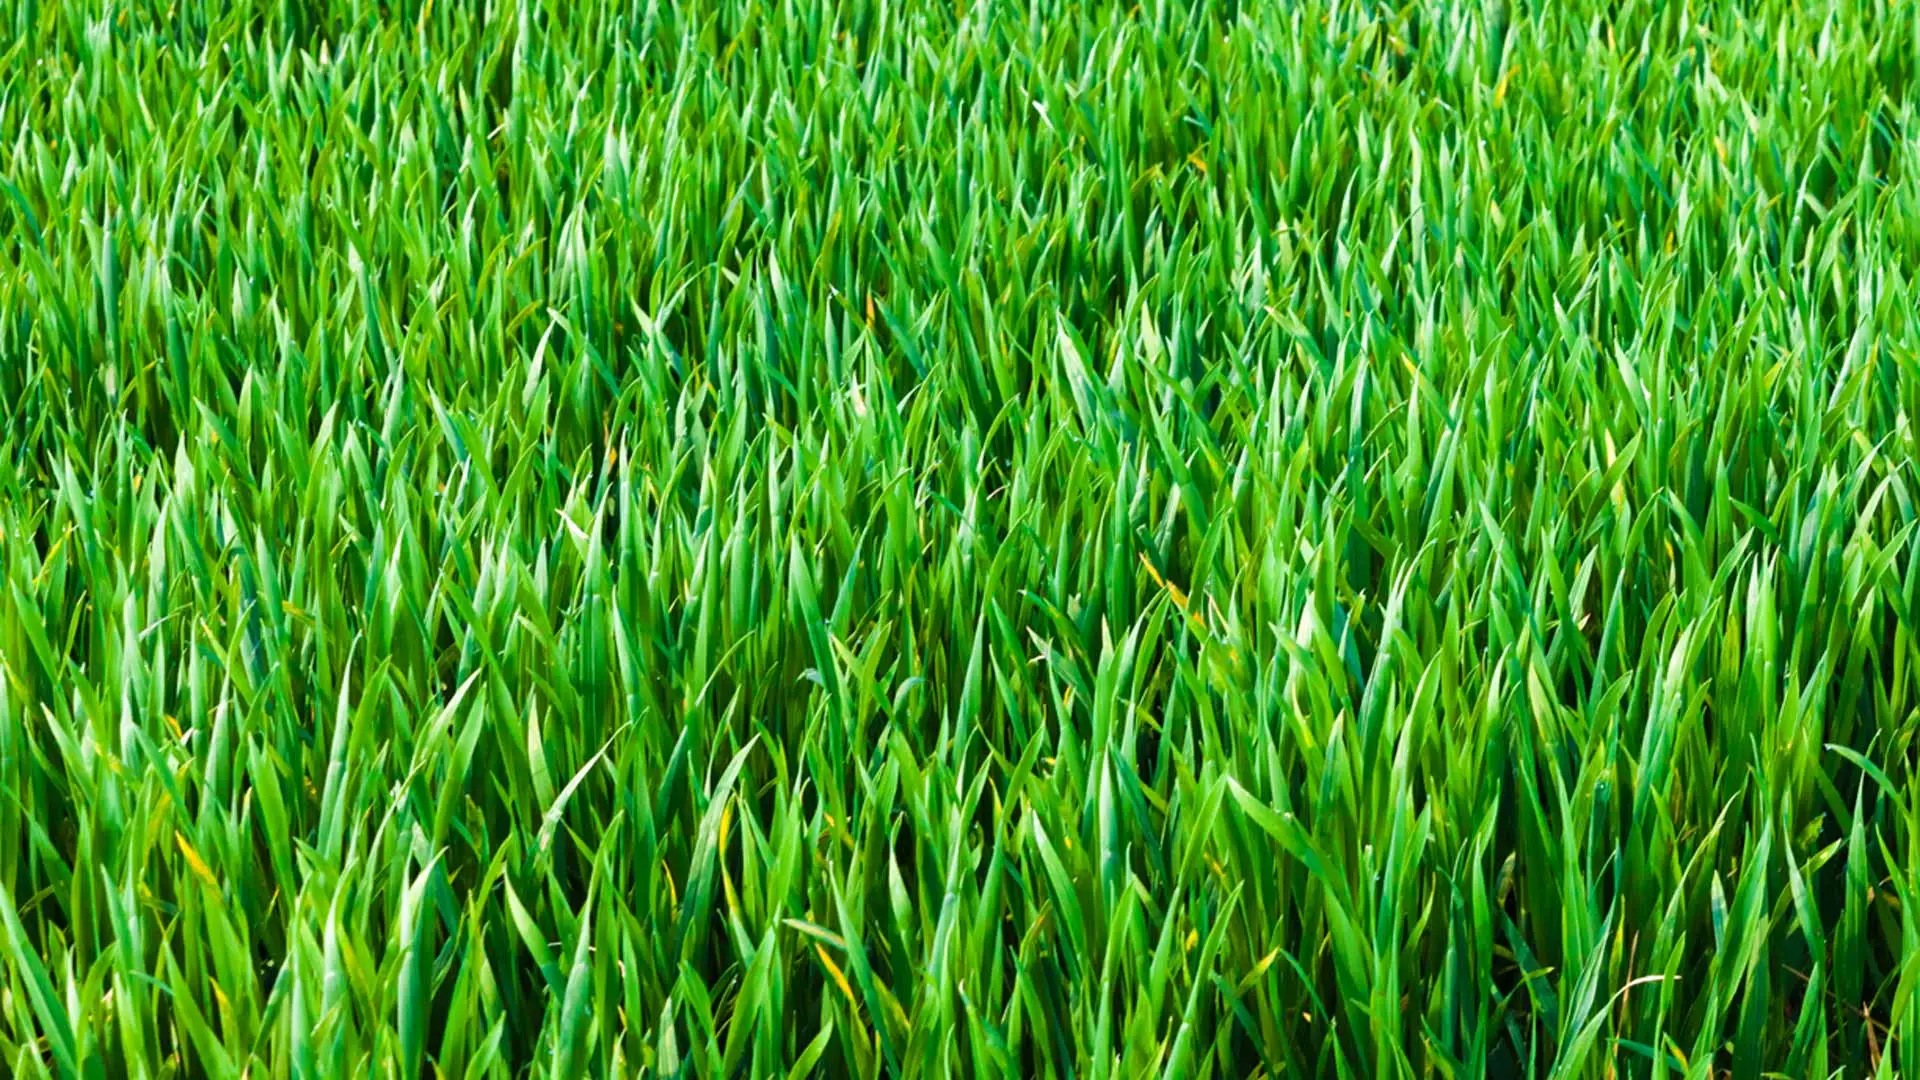 Do I Really Need to Have My Lawn Aerated Every Year?